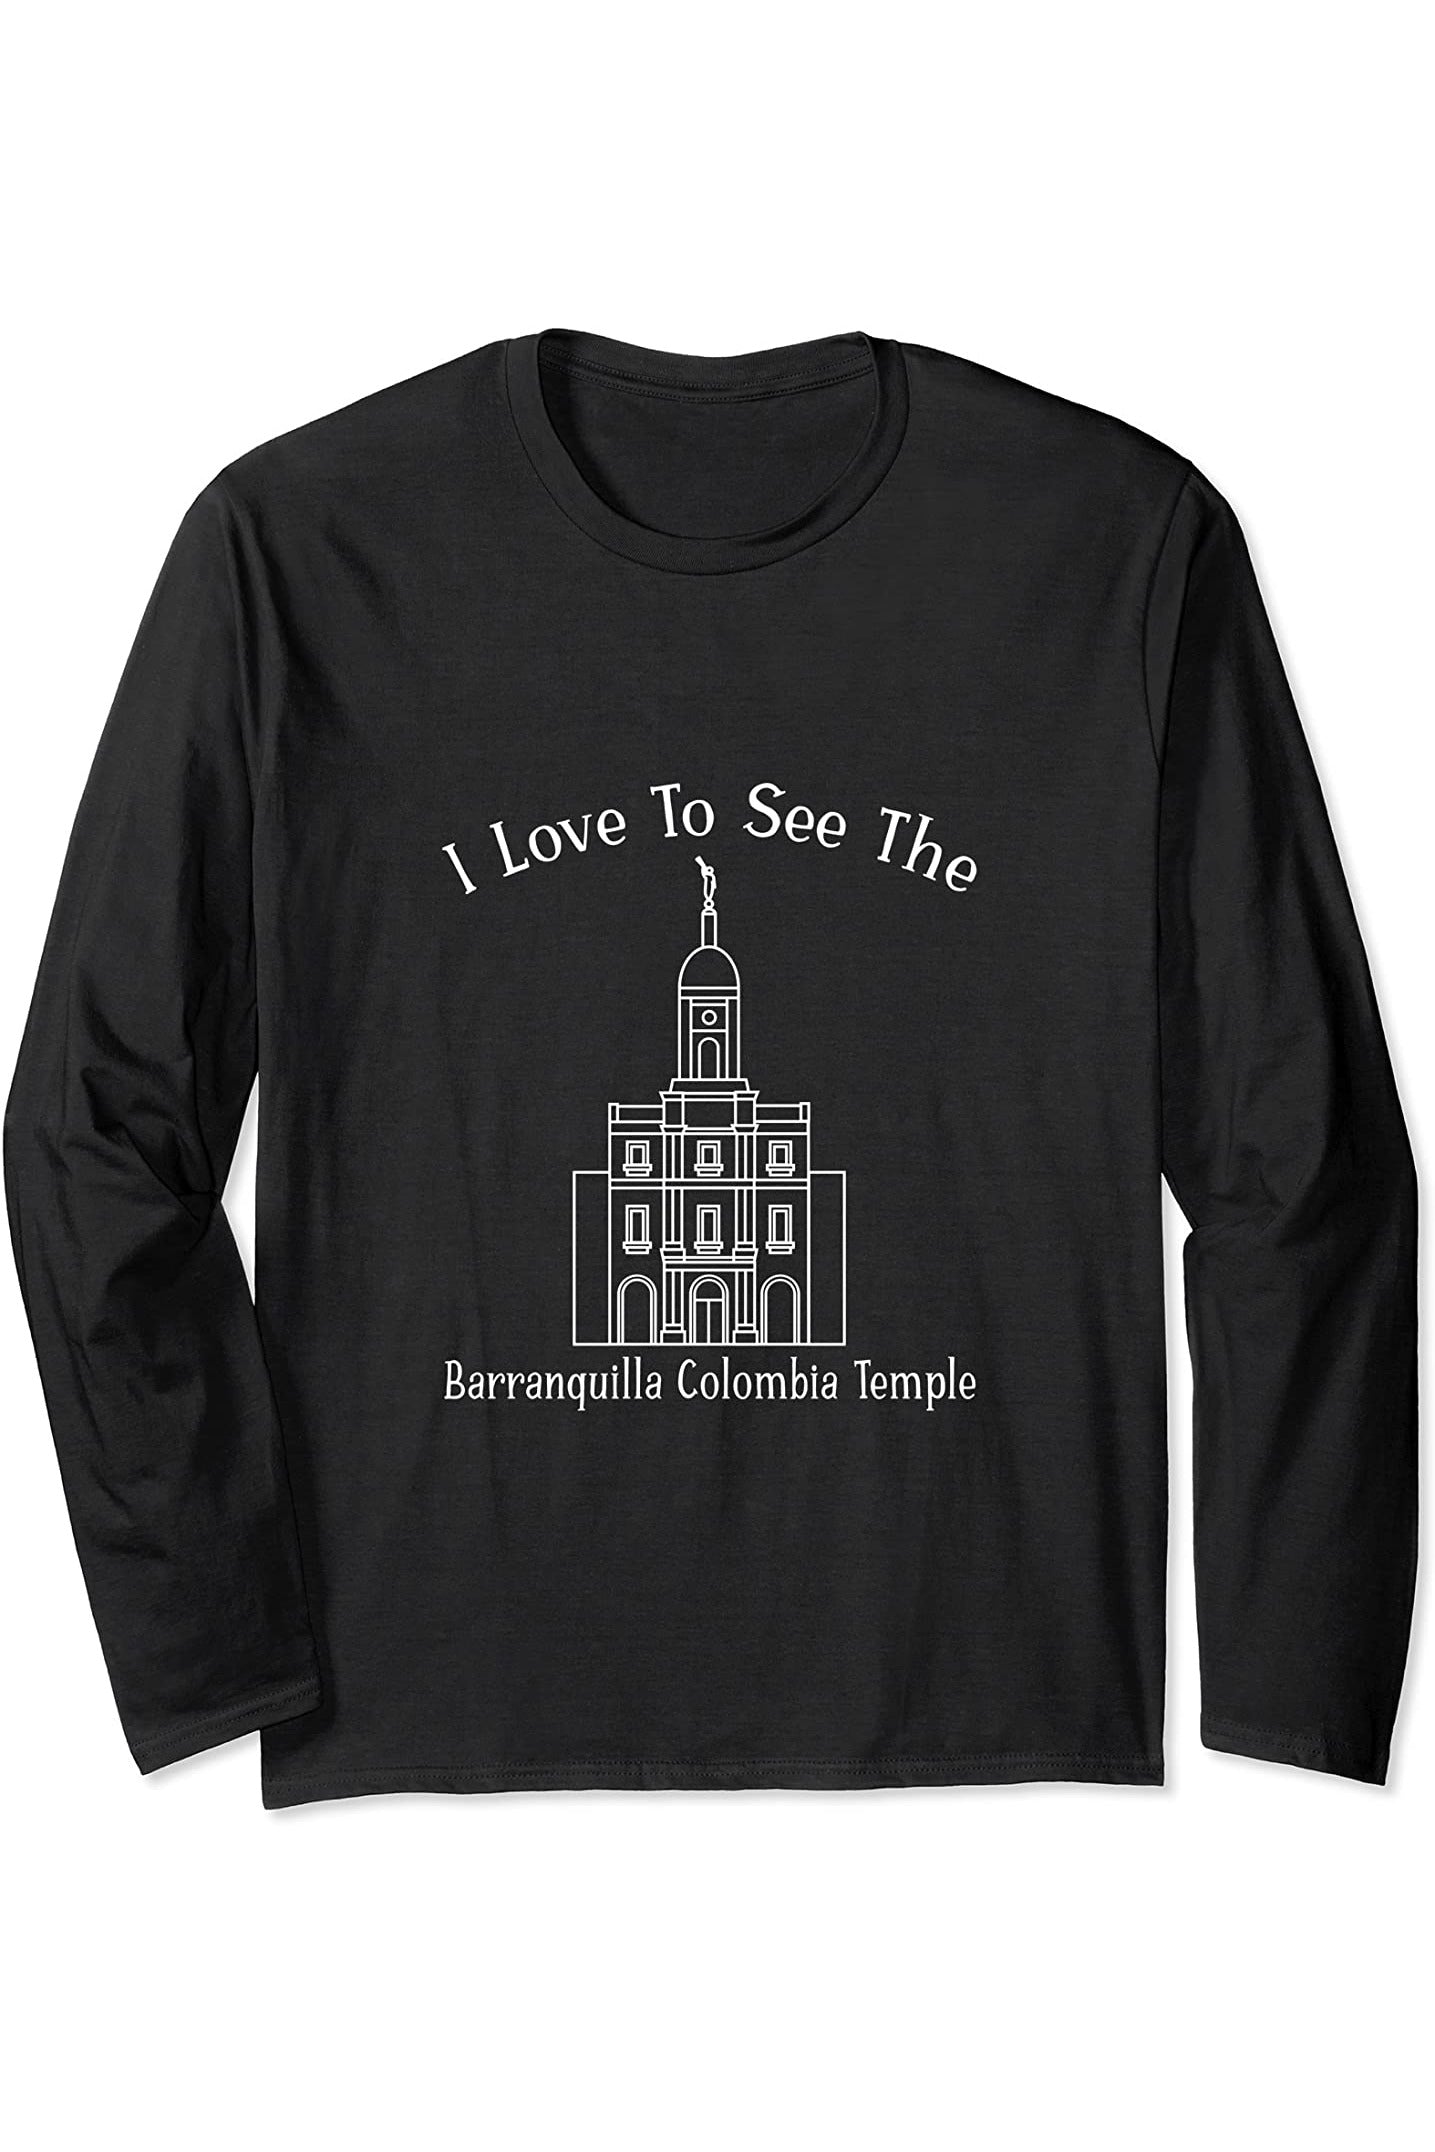 Barranquilla Colombia Temple Long Sleeve T-Shirt - Happy Style (English) US